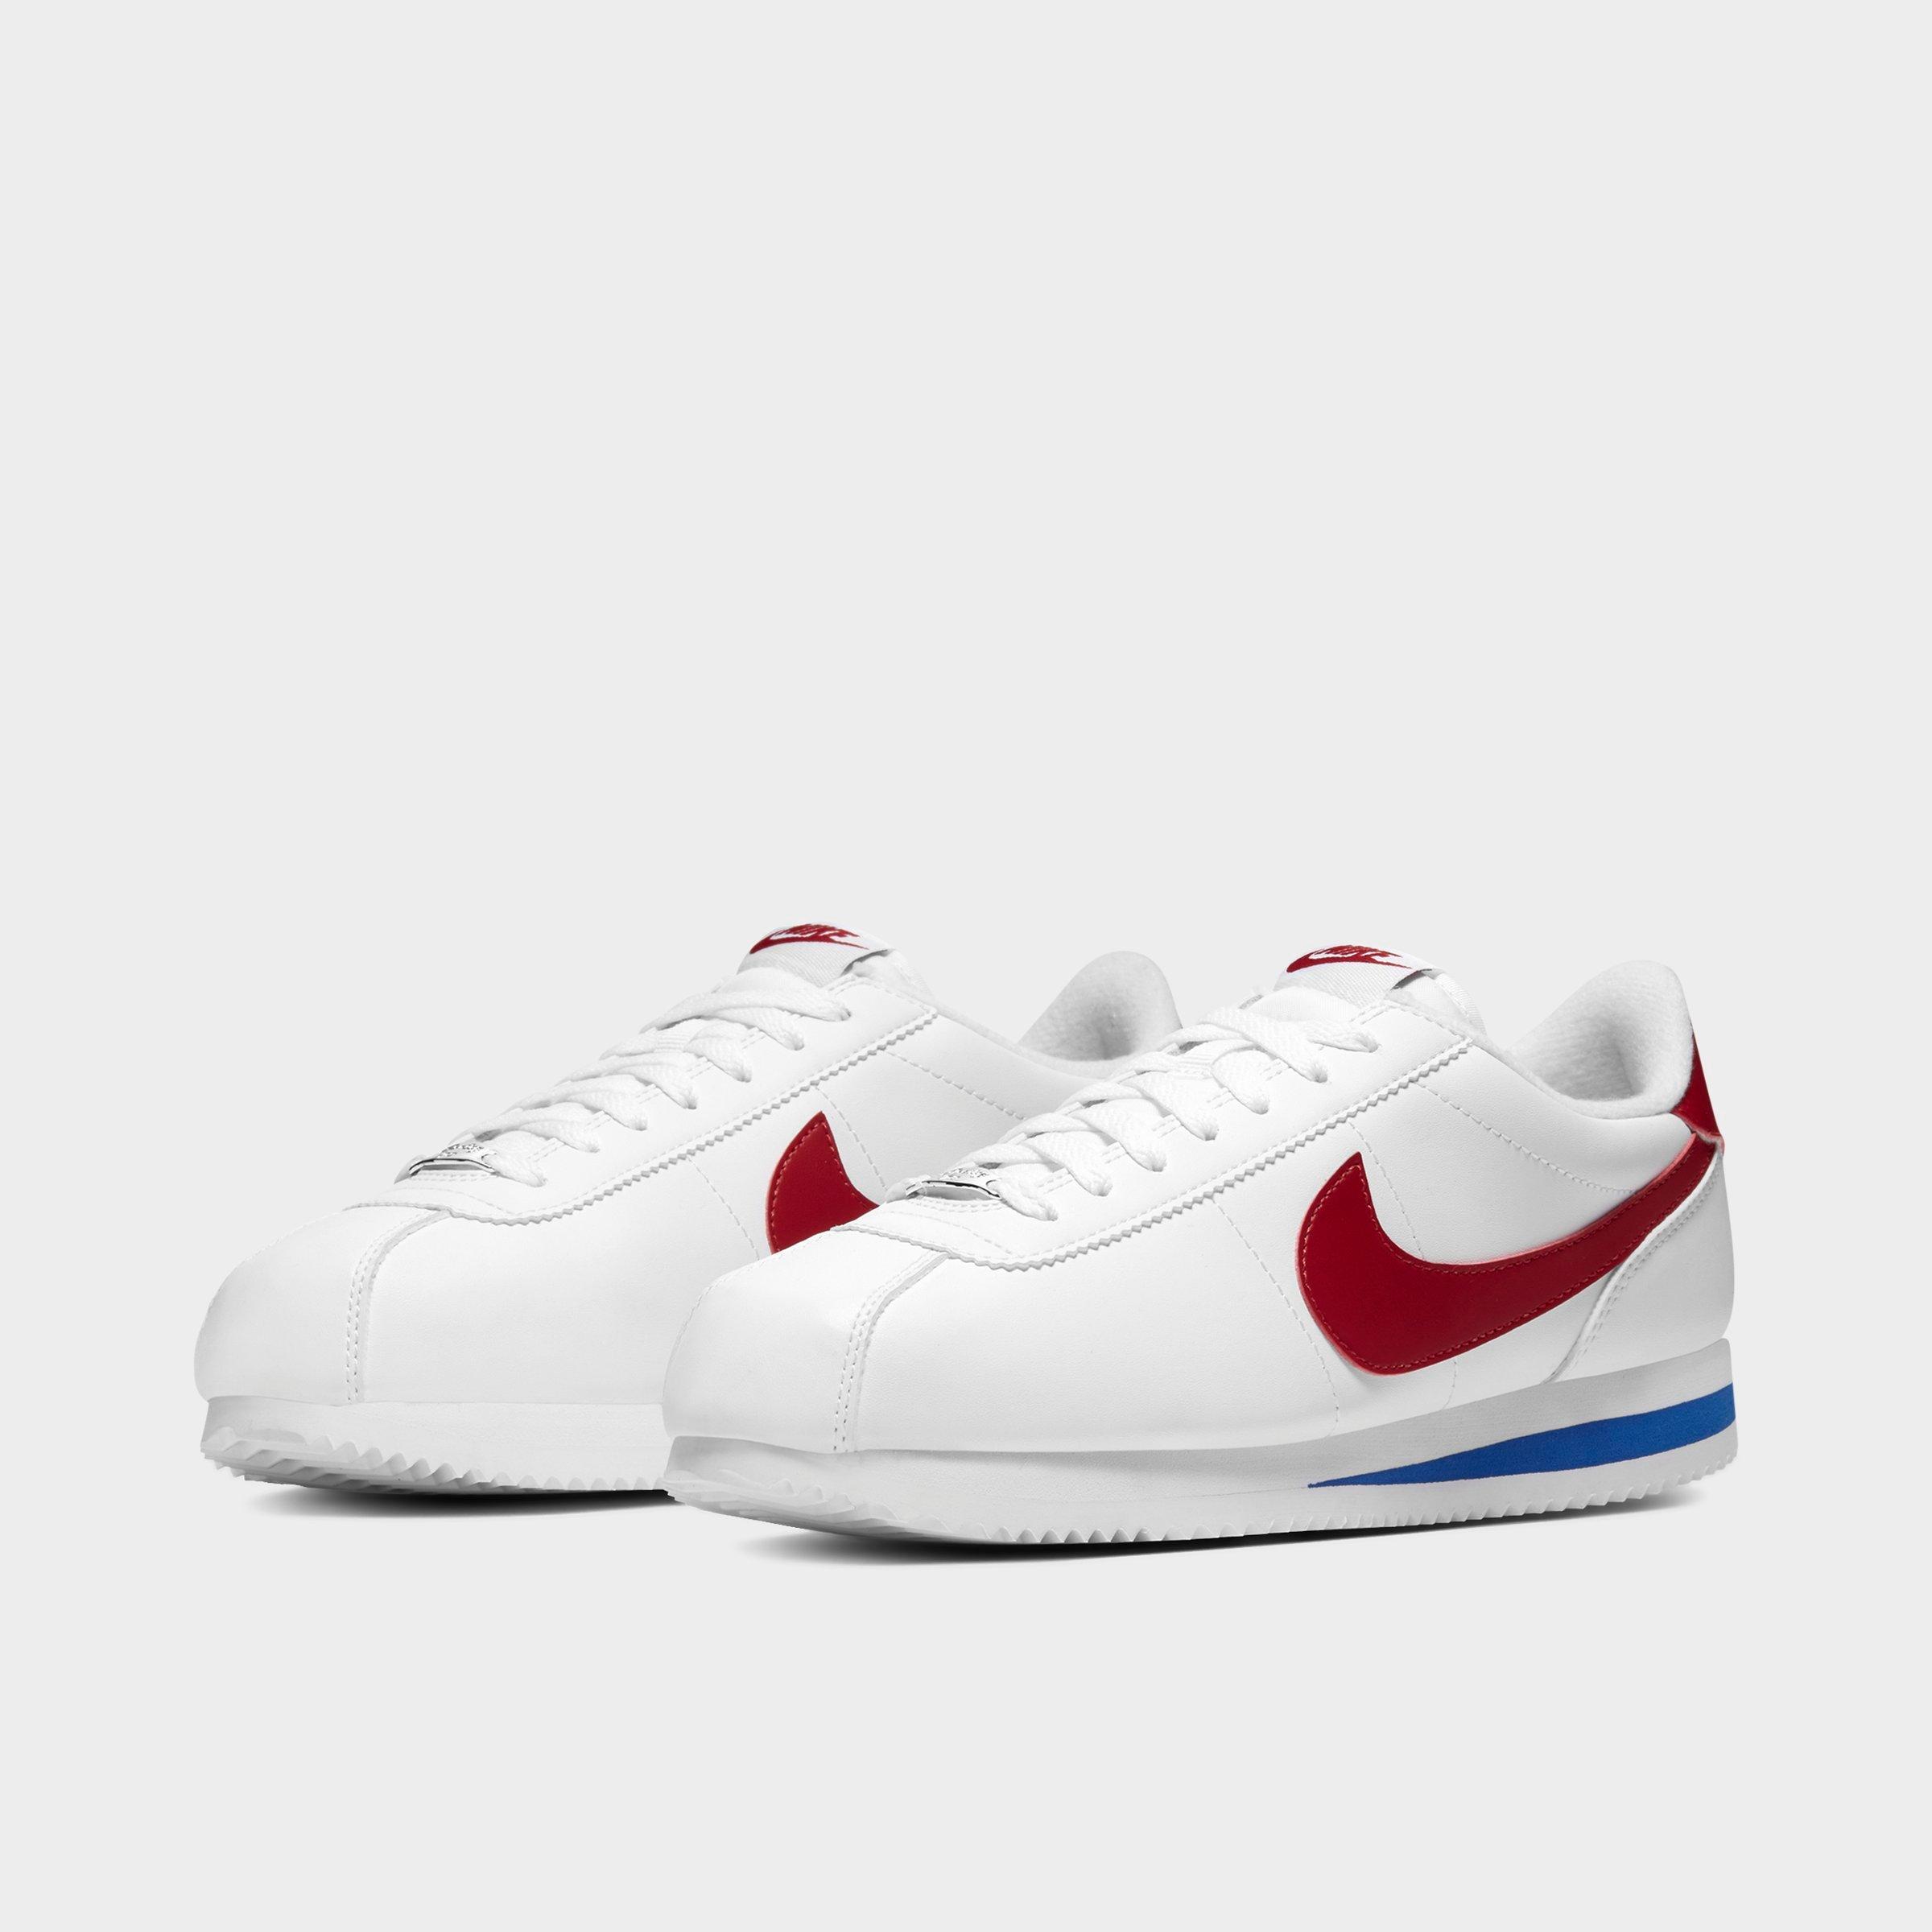 Men's Nike Cortez Basic Leather Casual Shoes on Sale, 20 OFF ...